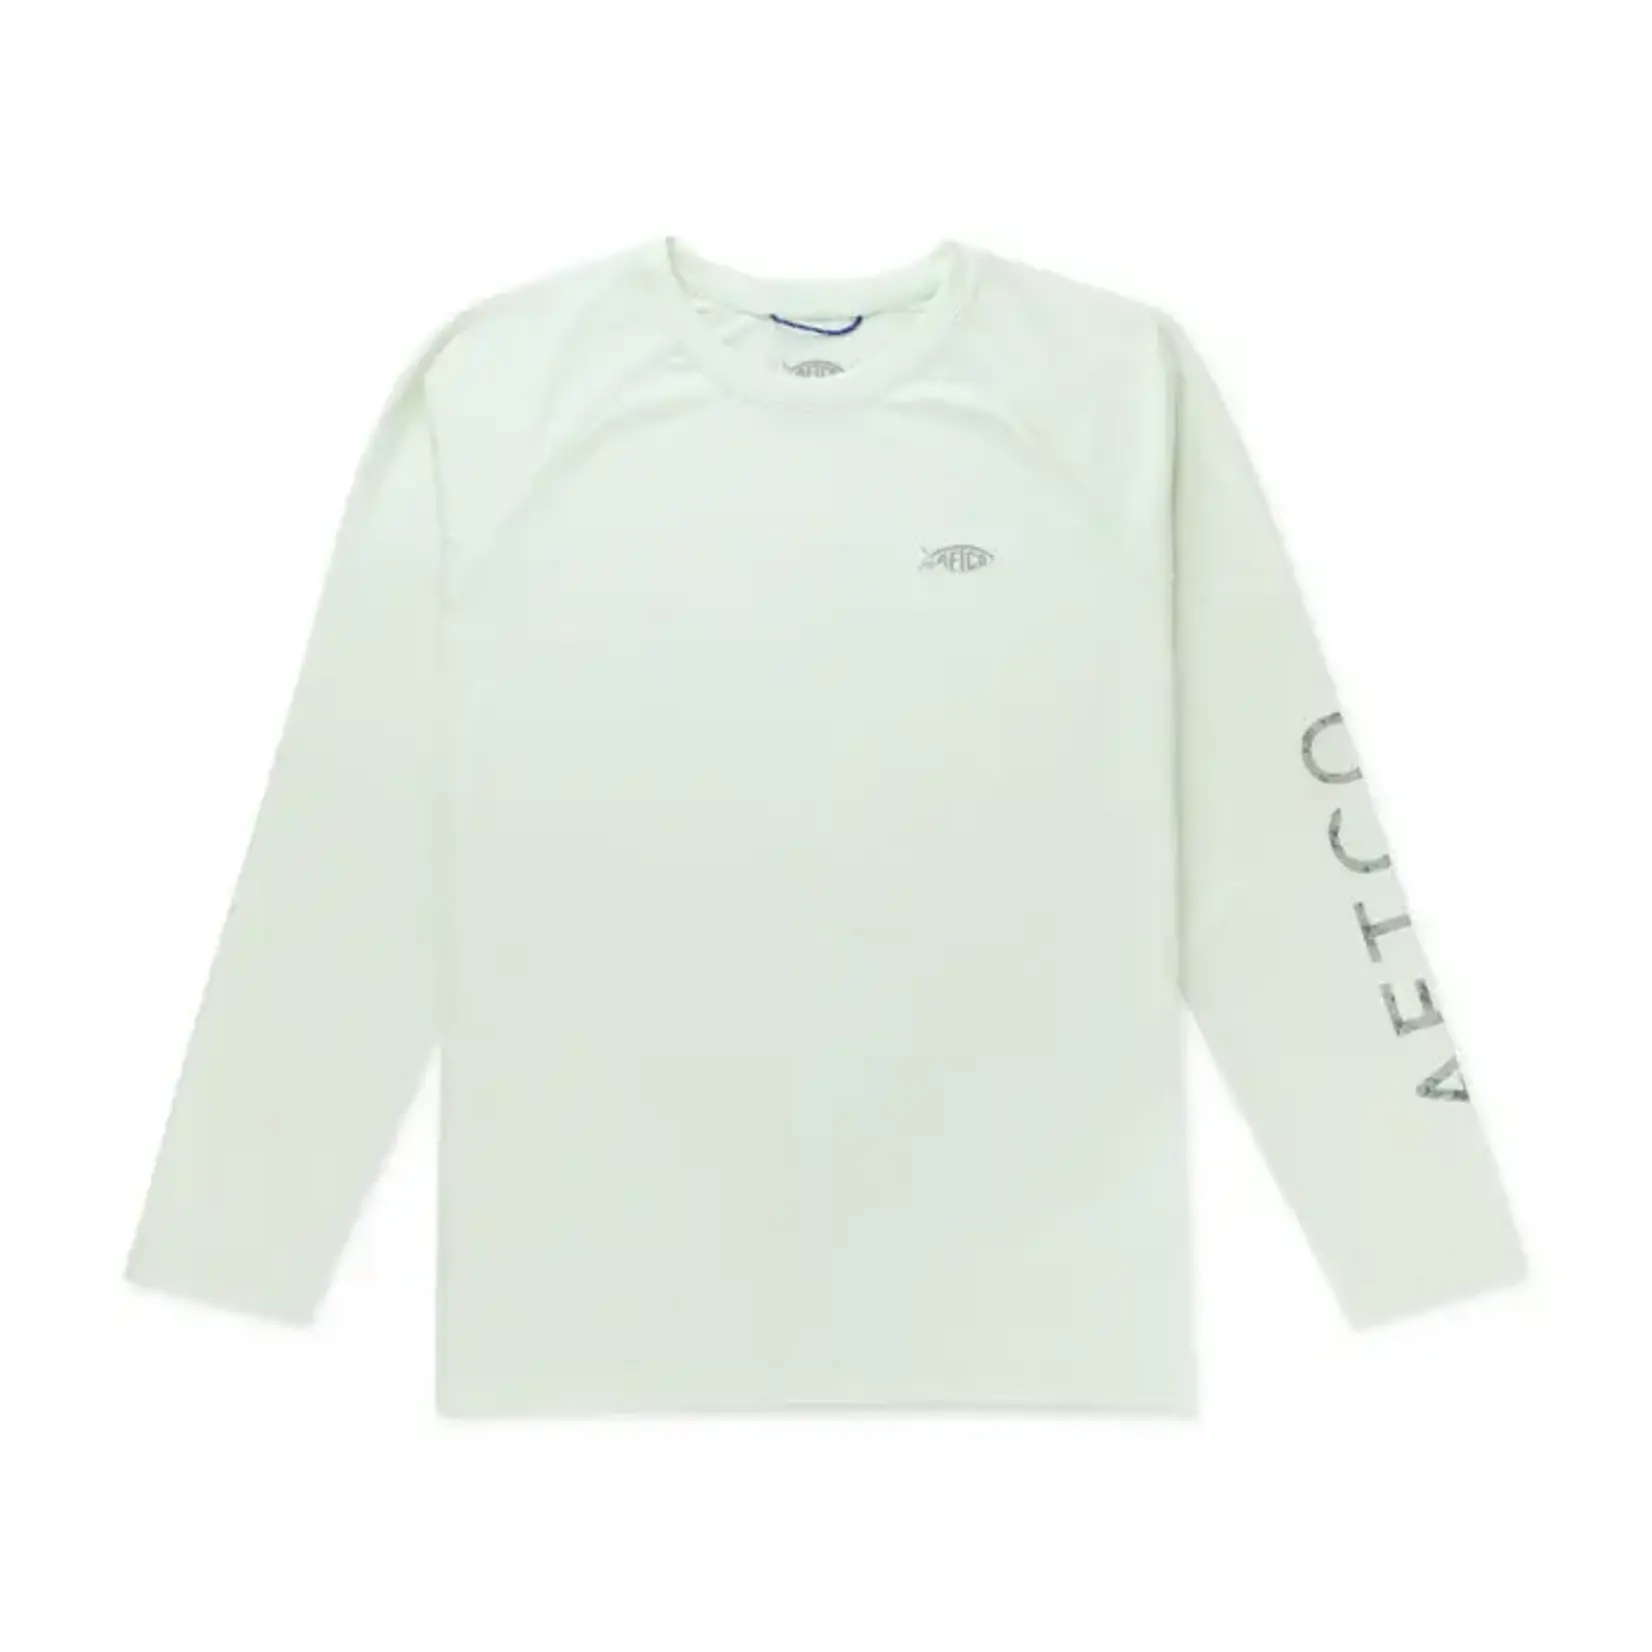 Aftco Aftco Youth Samurai 2 L/S Performance Shirt